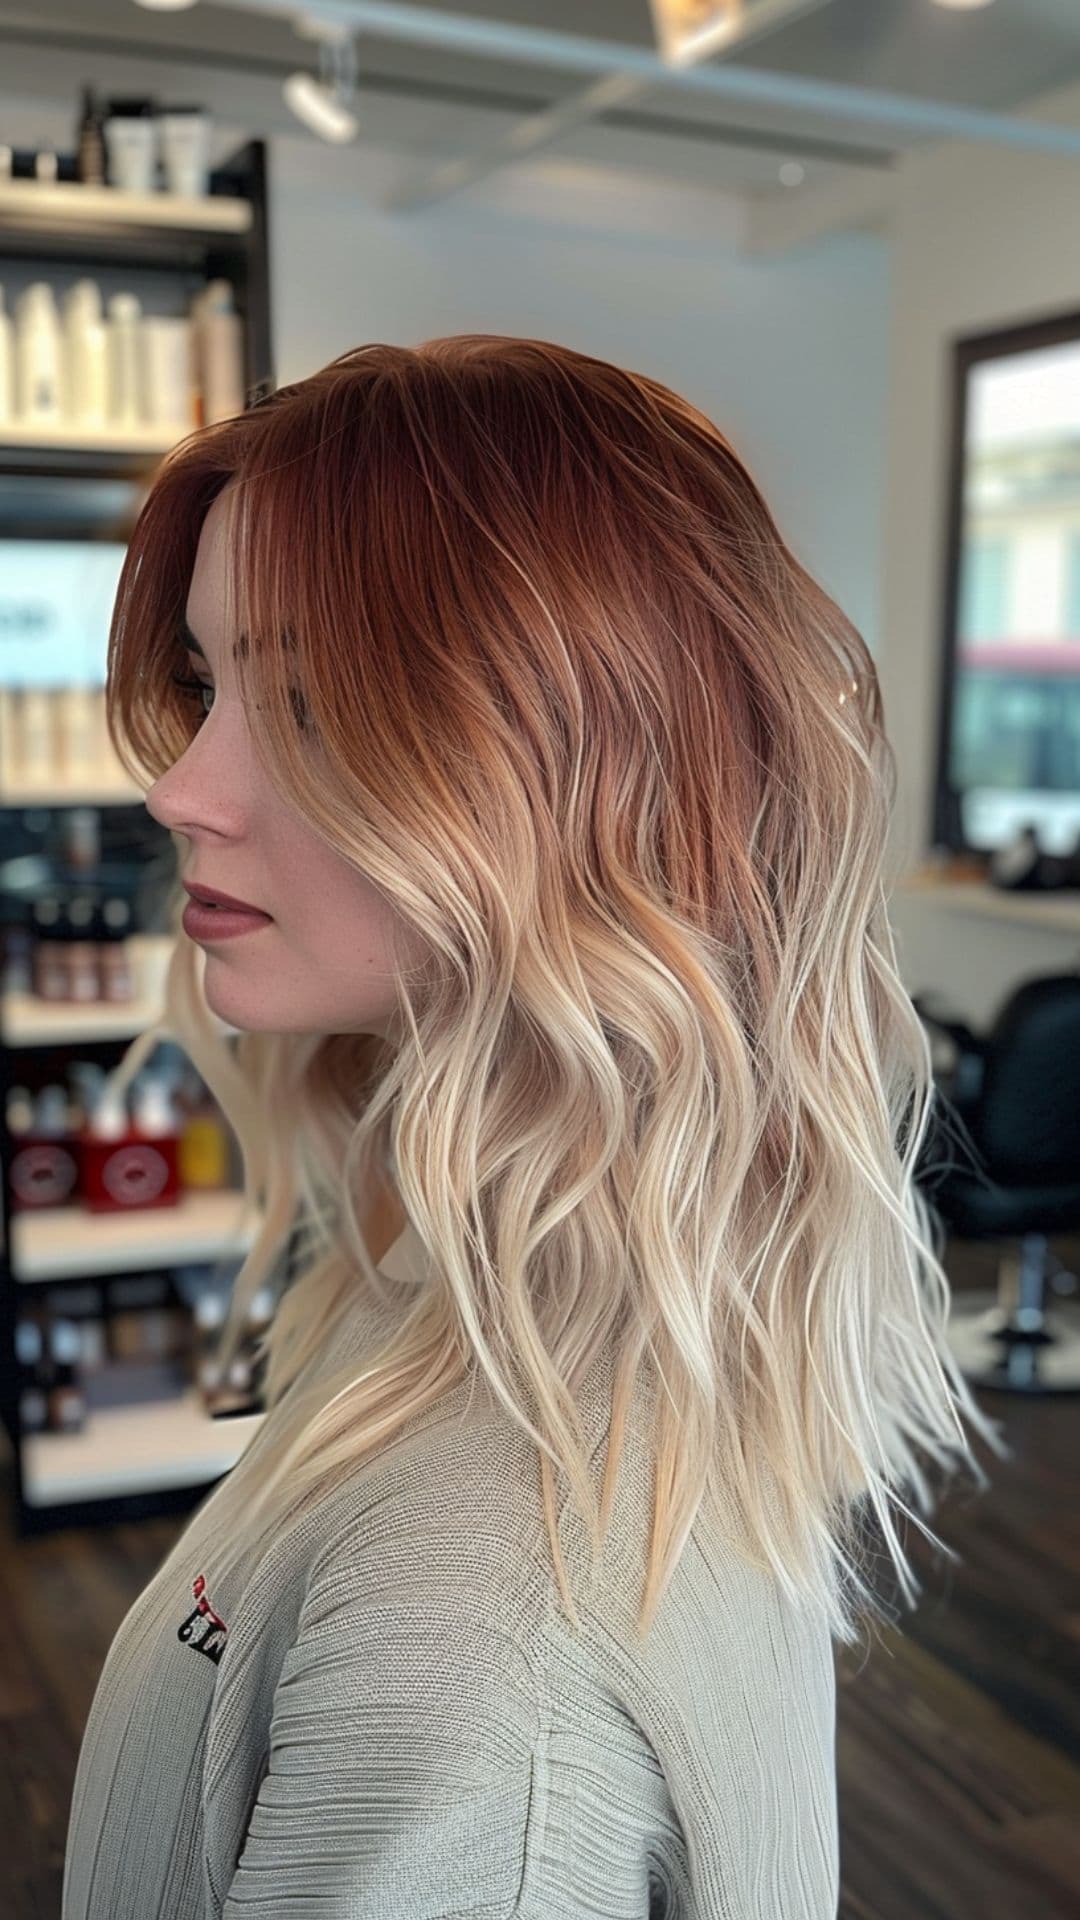 A woman modelling a burgundy to blonde ombre hair.